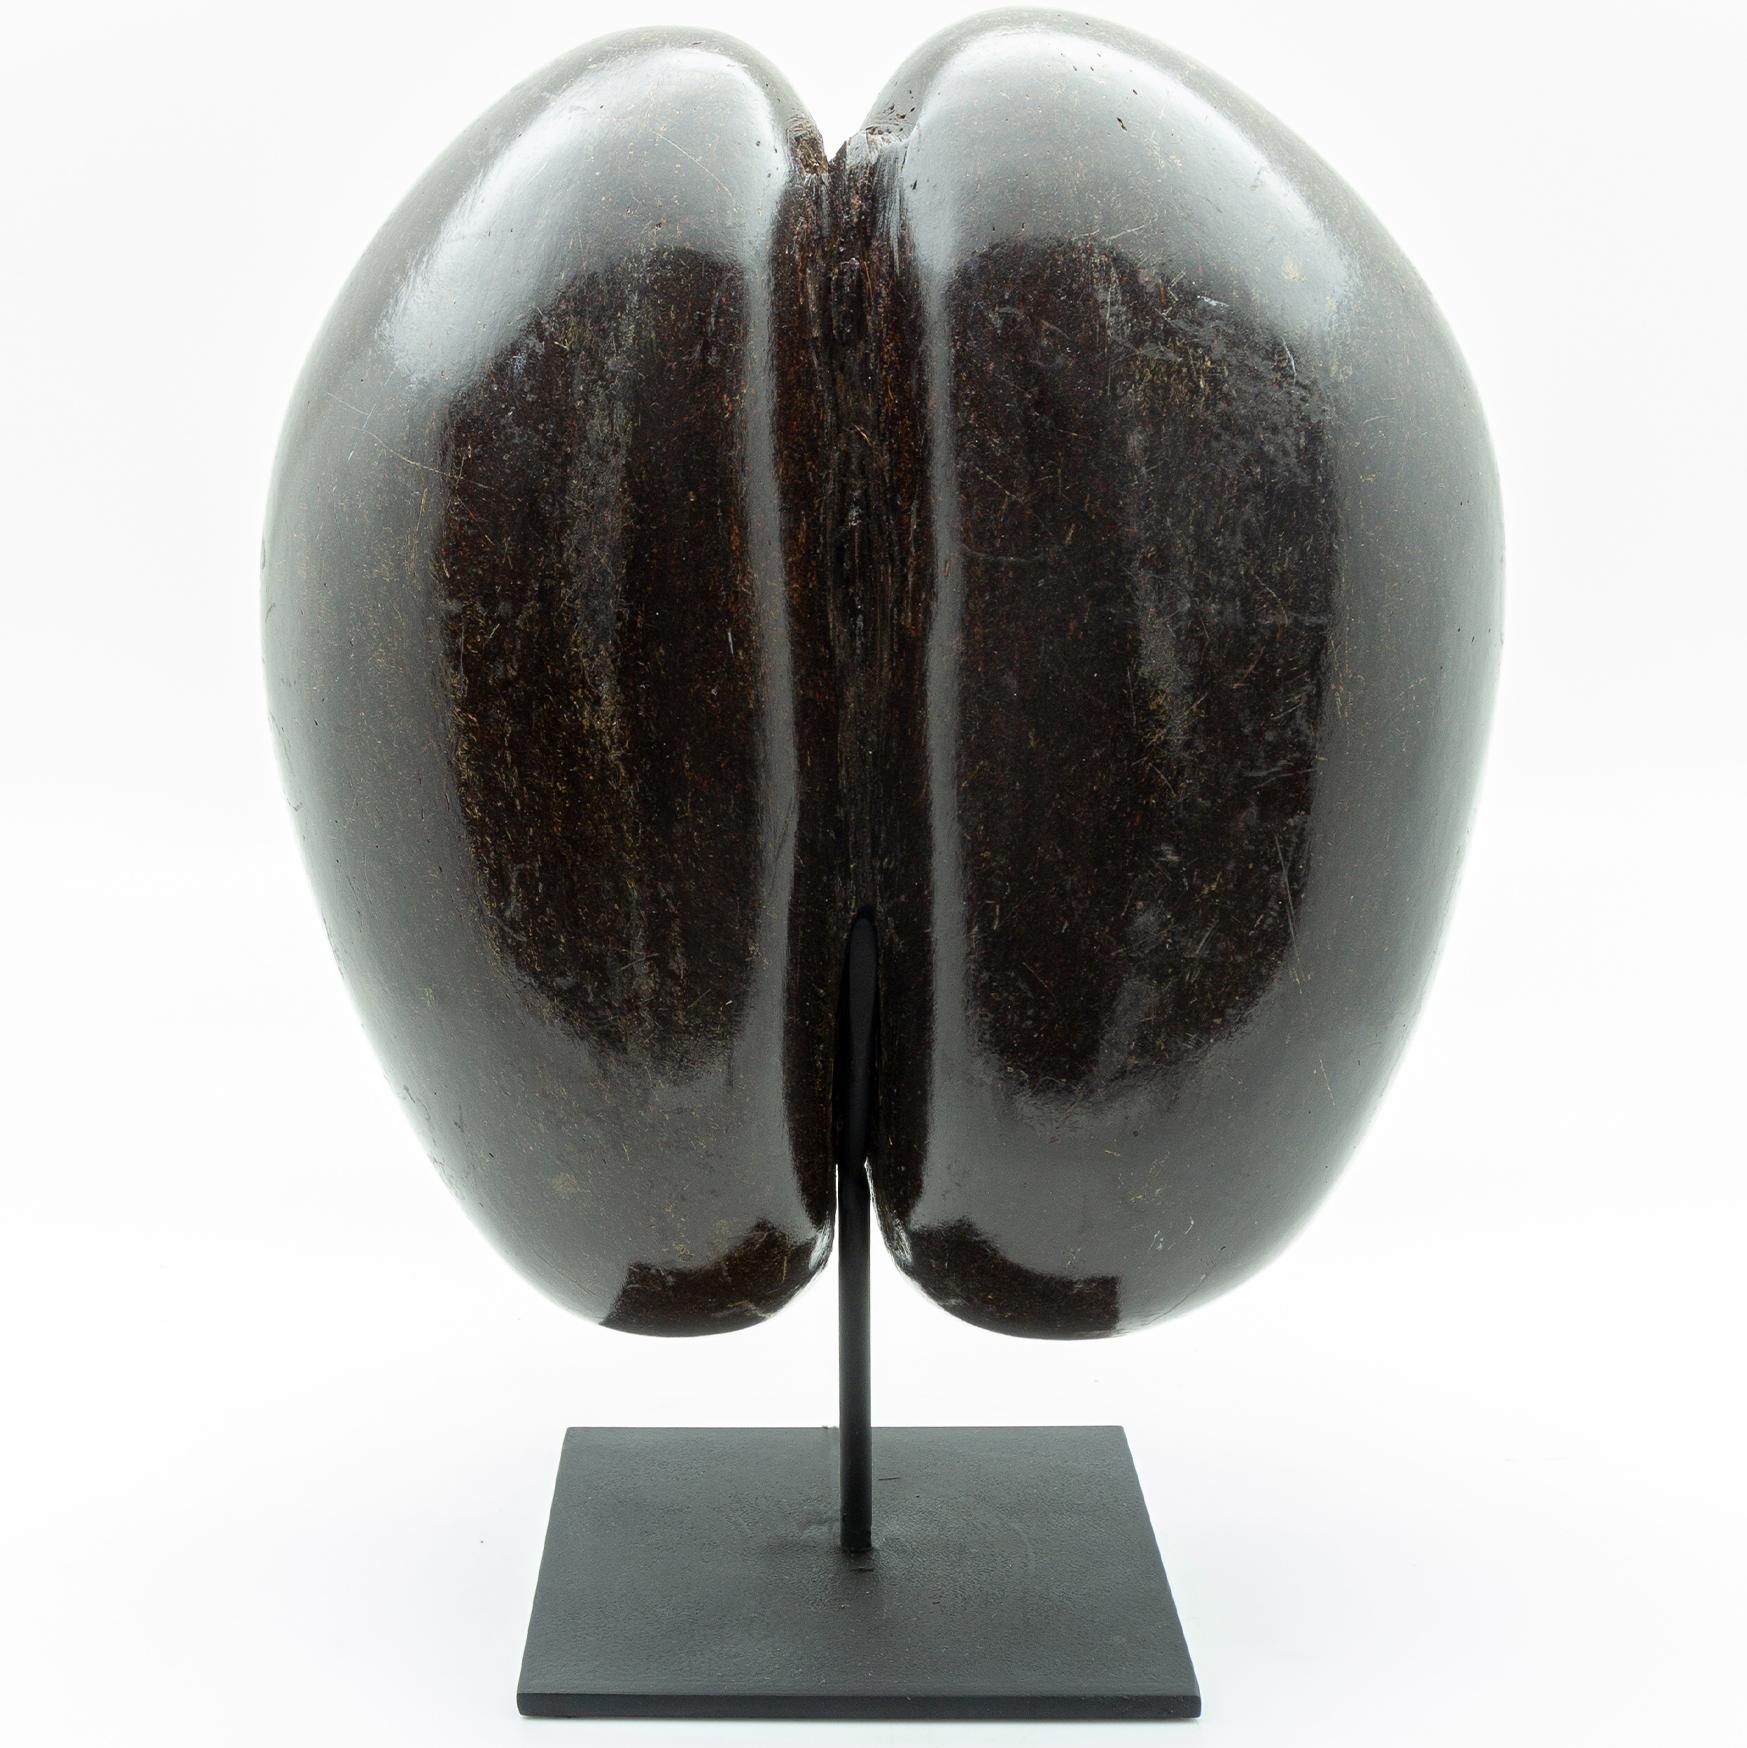 Coco de mer mounted on metal black base. Commonly known as the sea coconut, or double coconut, it is the monotypic genus of the palm family. Measures: Height 14.4”
